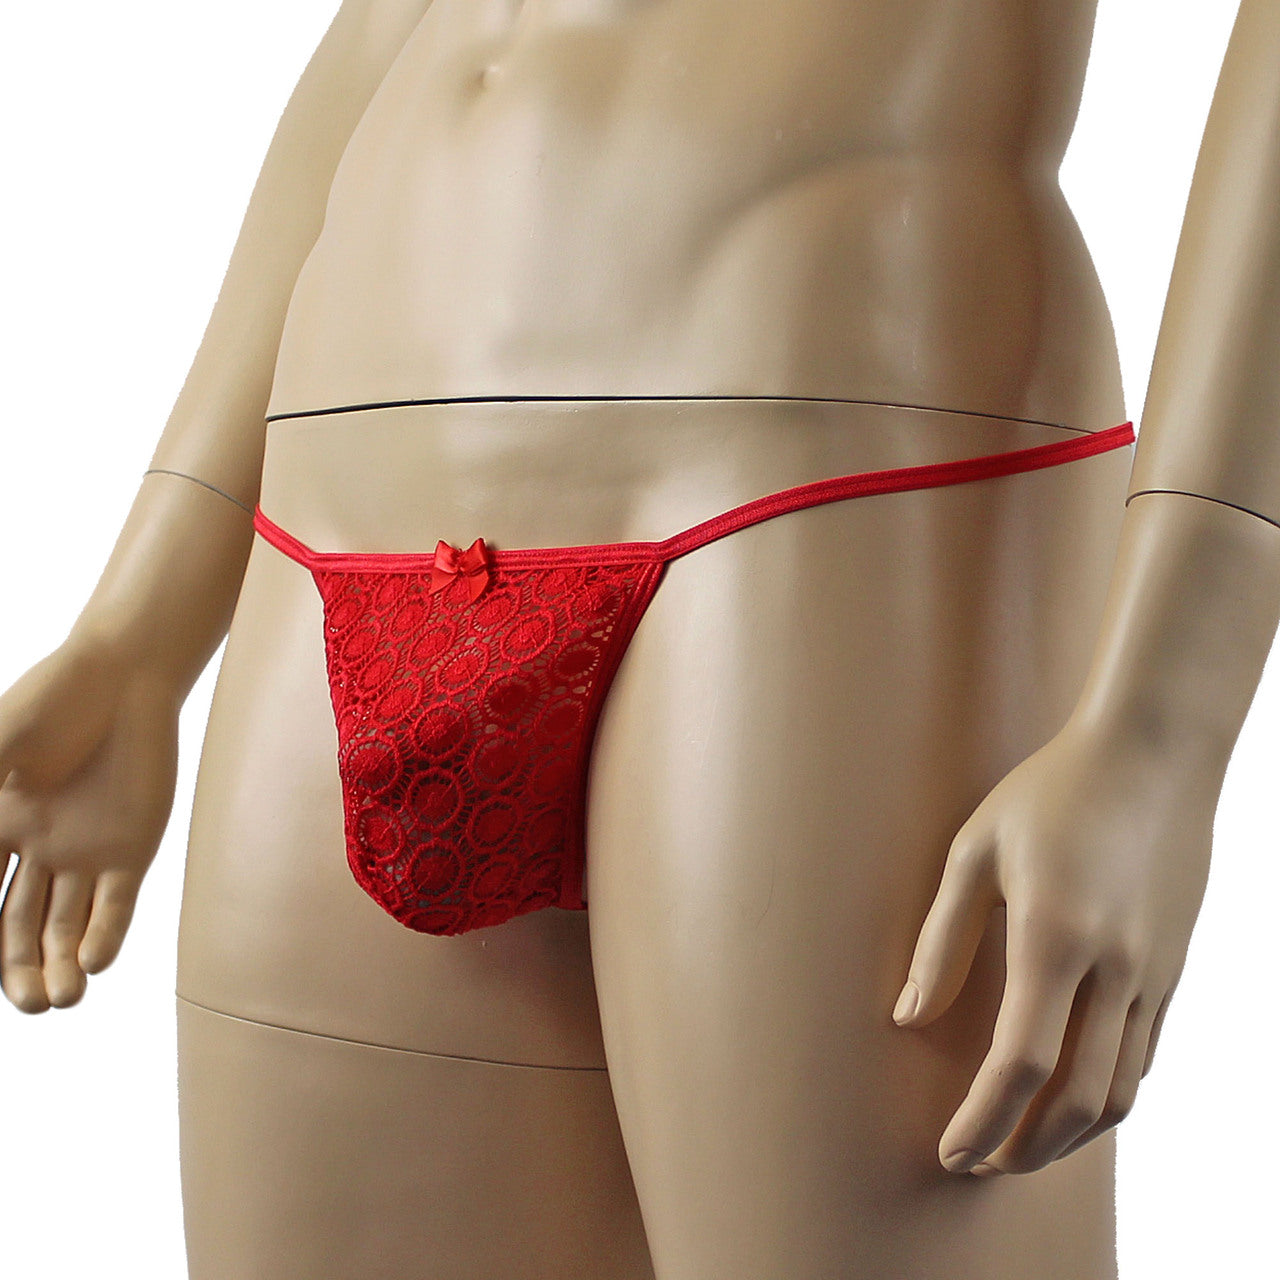 Mens Tease Circle Lace Pouch G string with Cute Bow Front Red